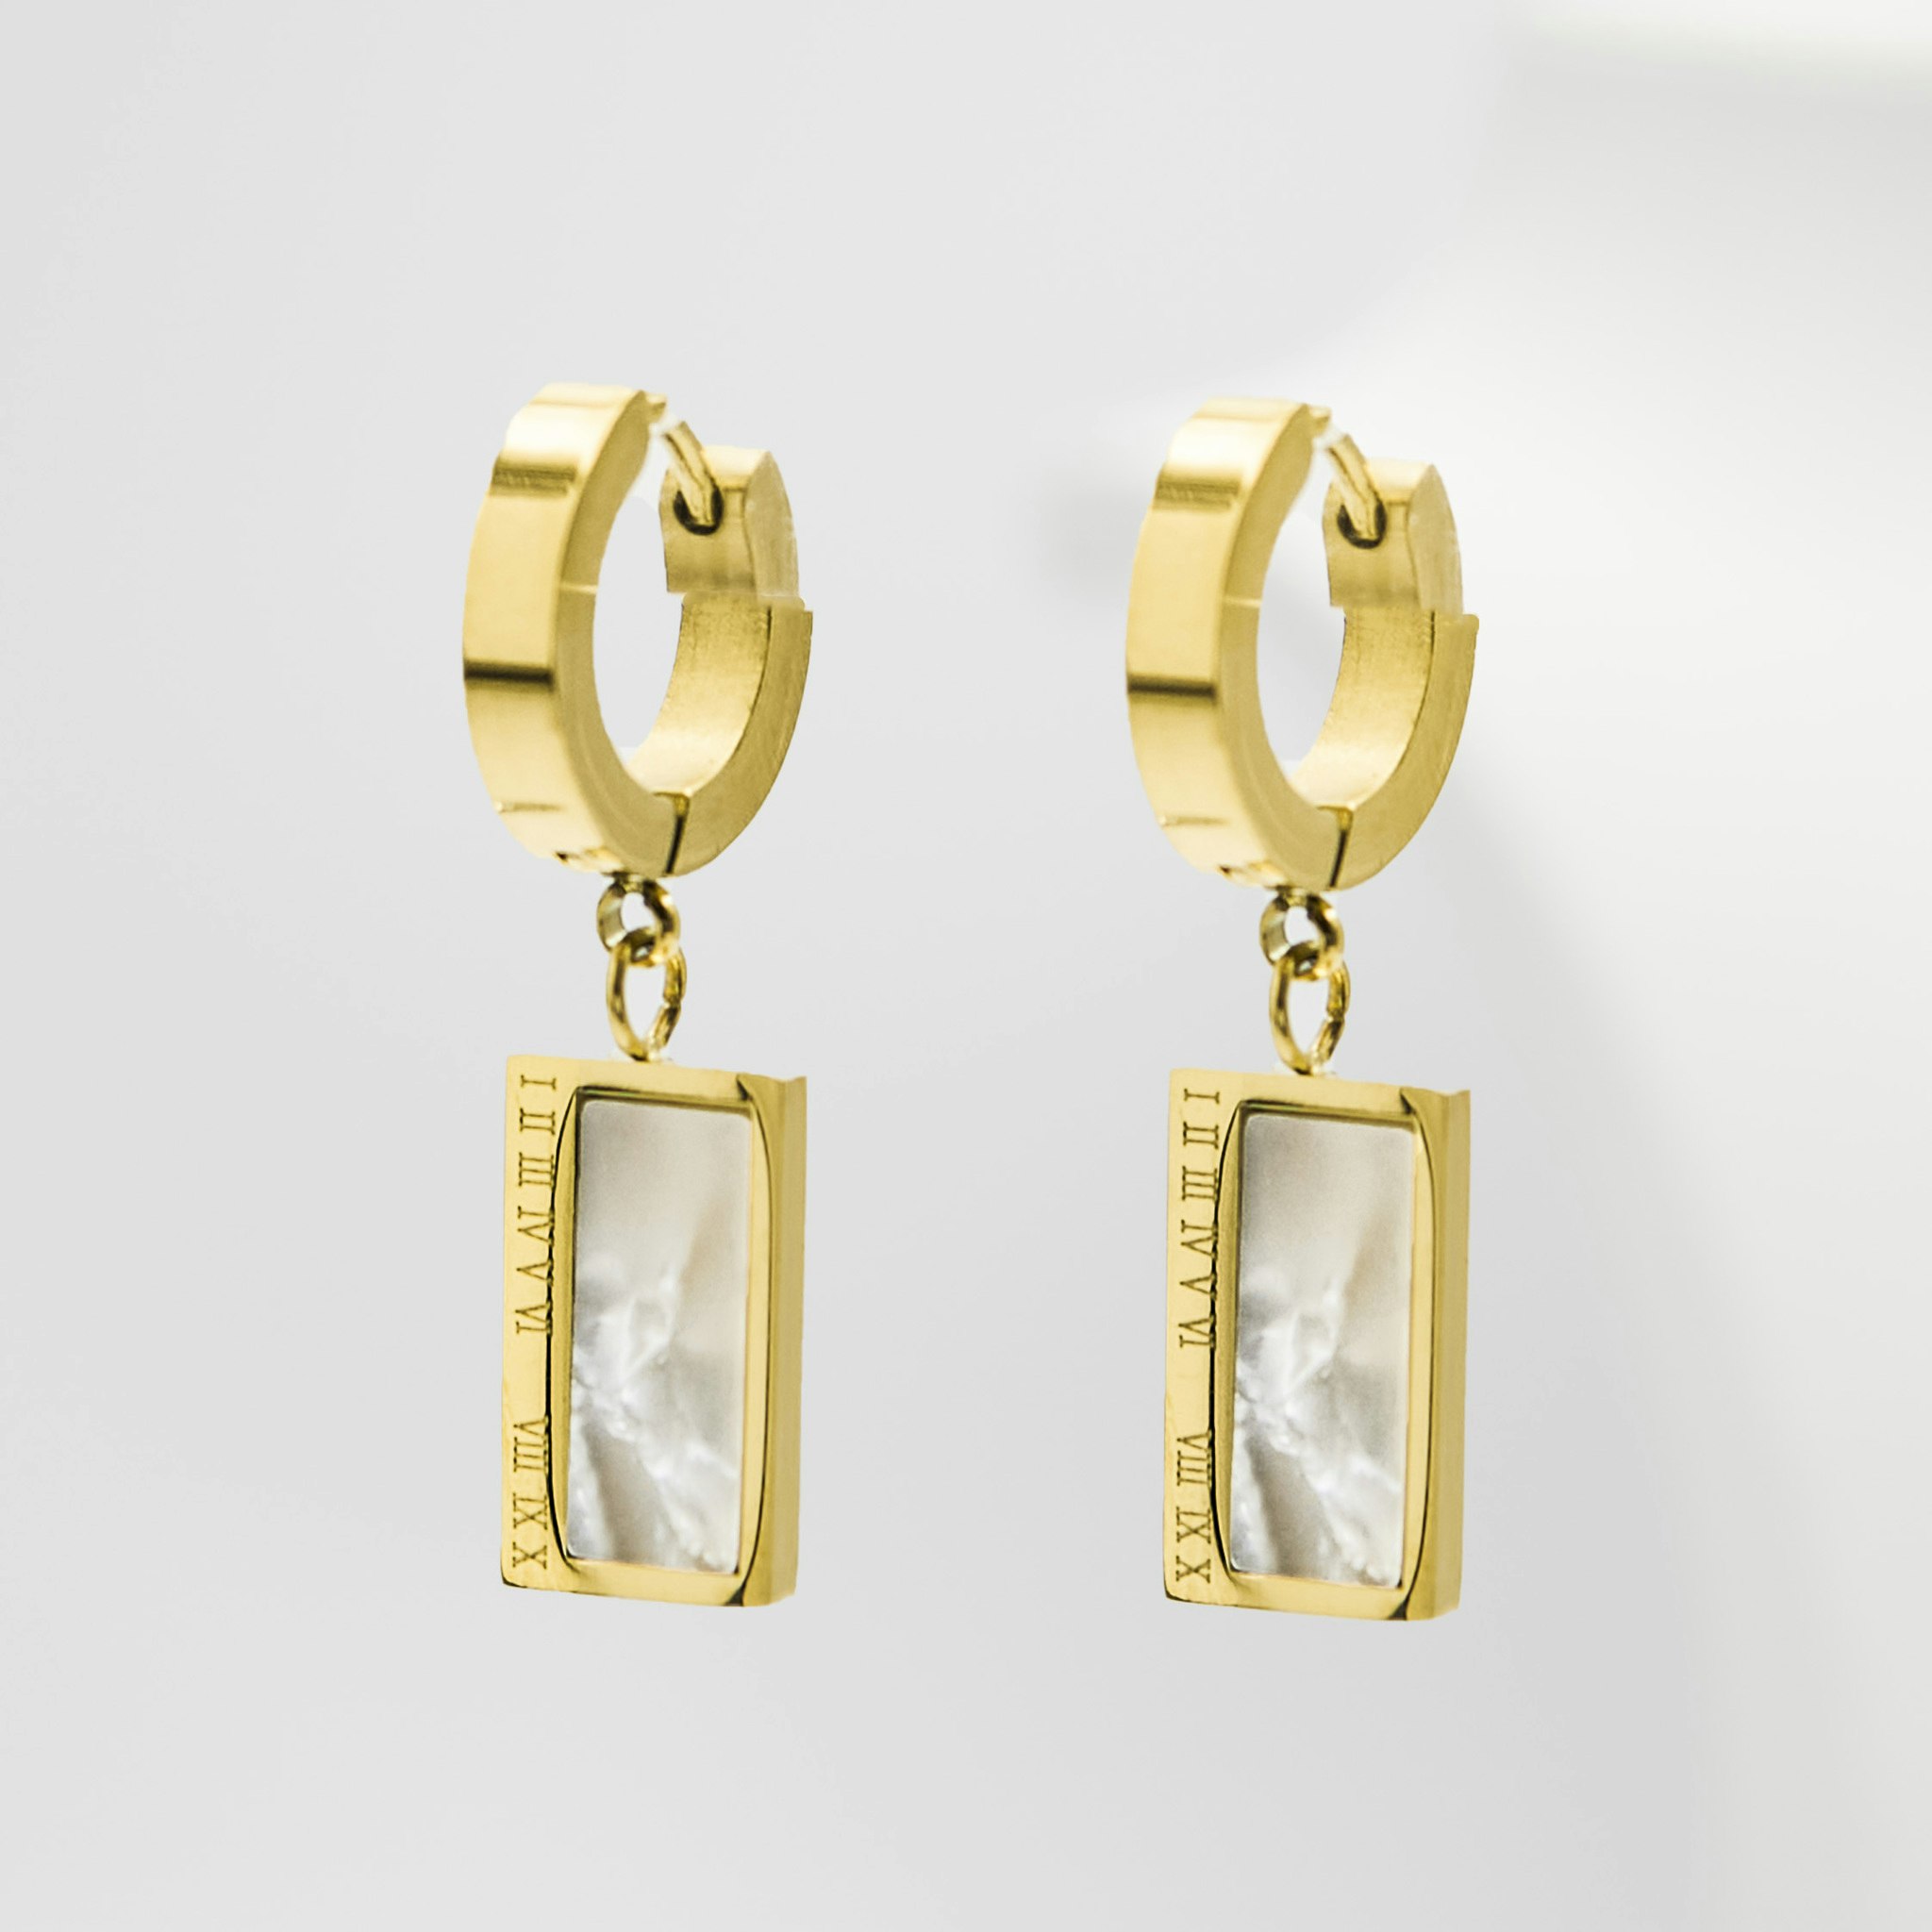 2- Era White Marble Gold Edition -Örhänge 316 L - Special Earrings From SWEVALI